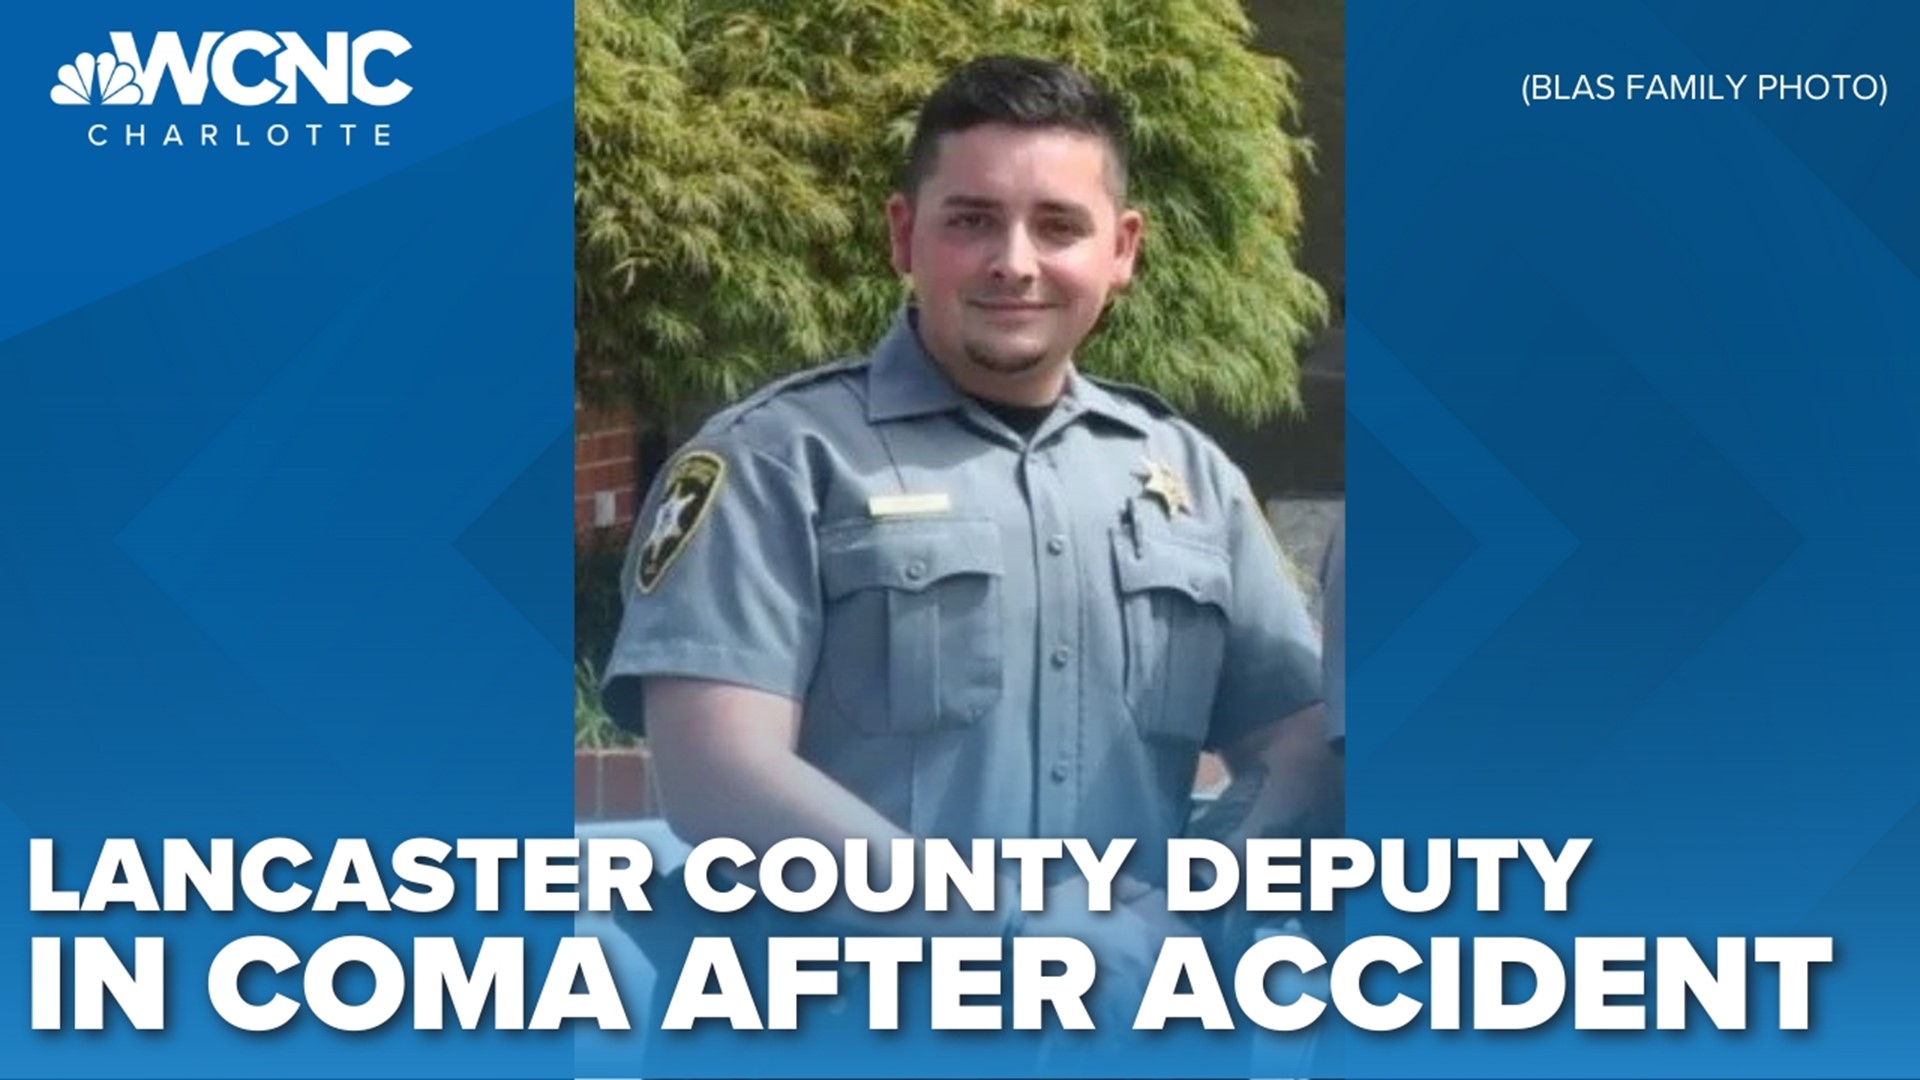 For the past three years, Deputy Paul Blas has served with the Lancaster County Sheriff’s Office. His brother says it’s been his dream job.